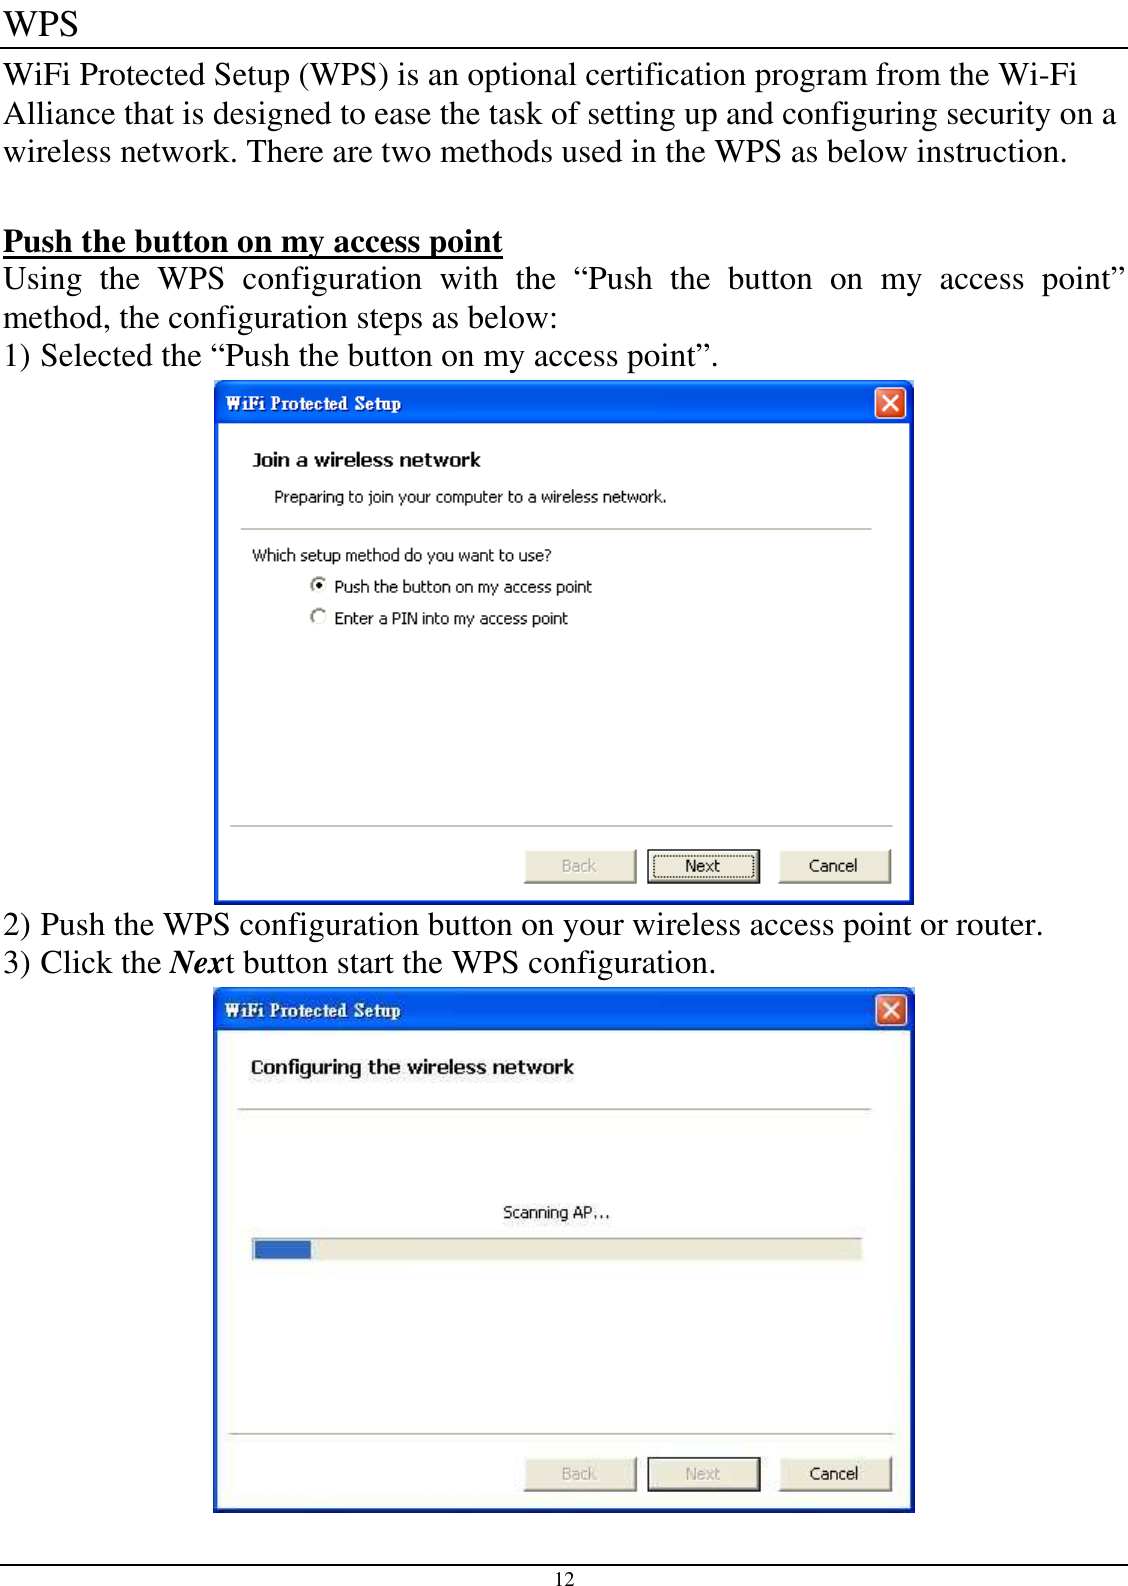  12 WPS WiFi Protected Setup (WPS) is an optional certification program from the Wi-Fi Alliance that is designed to ease the task of setting up and configuring security on a wireless network. There are two methods used in the WPS as below instruction.  Push the button on my access point Using  the  WPS  configuration  with  the  “Push  the  button  on  my  access  point” method, the configuration steps as below: 1) Selected the “Push the button on my access point”.  2) Push the WPS configuration button on your wireless access point or router. 3) Click the Next button start the WPS configuration.  